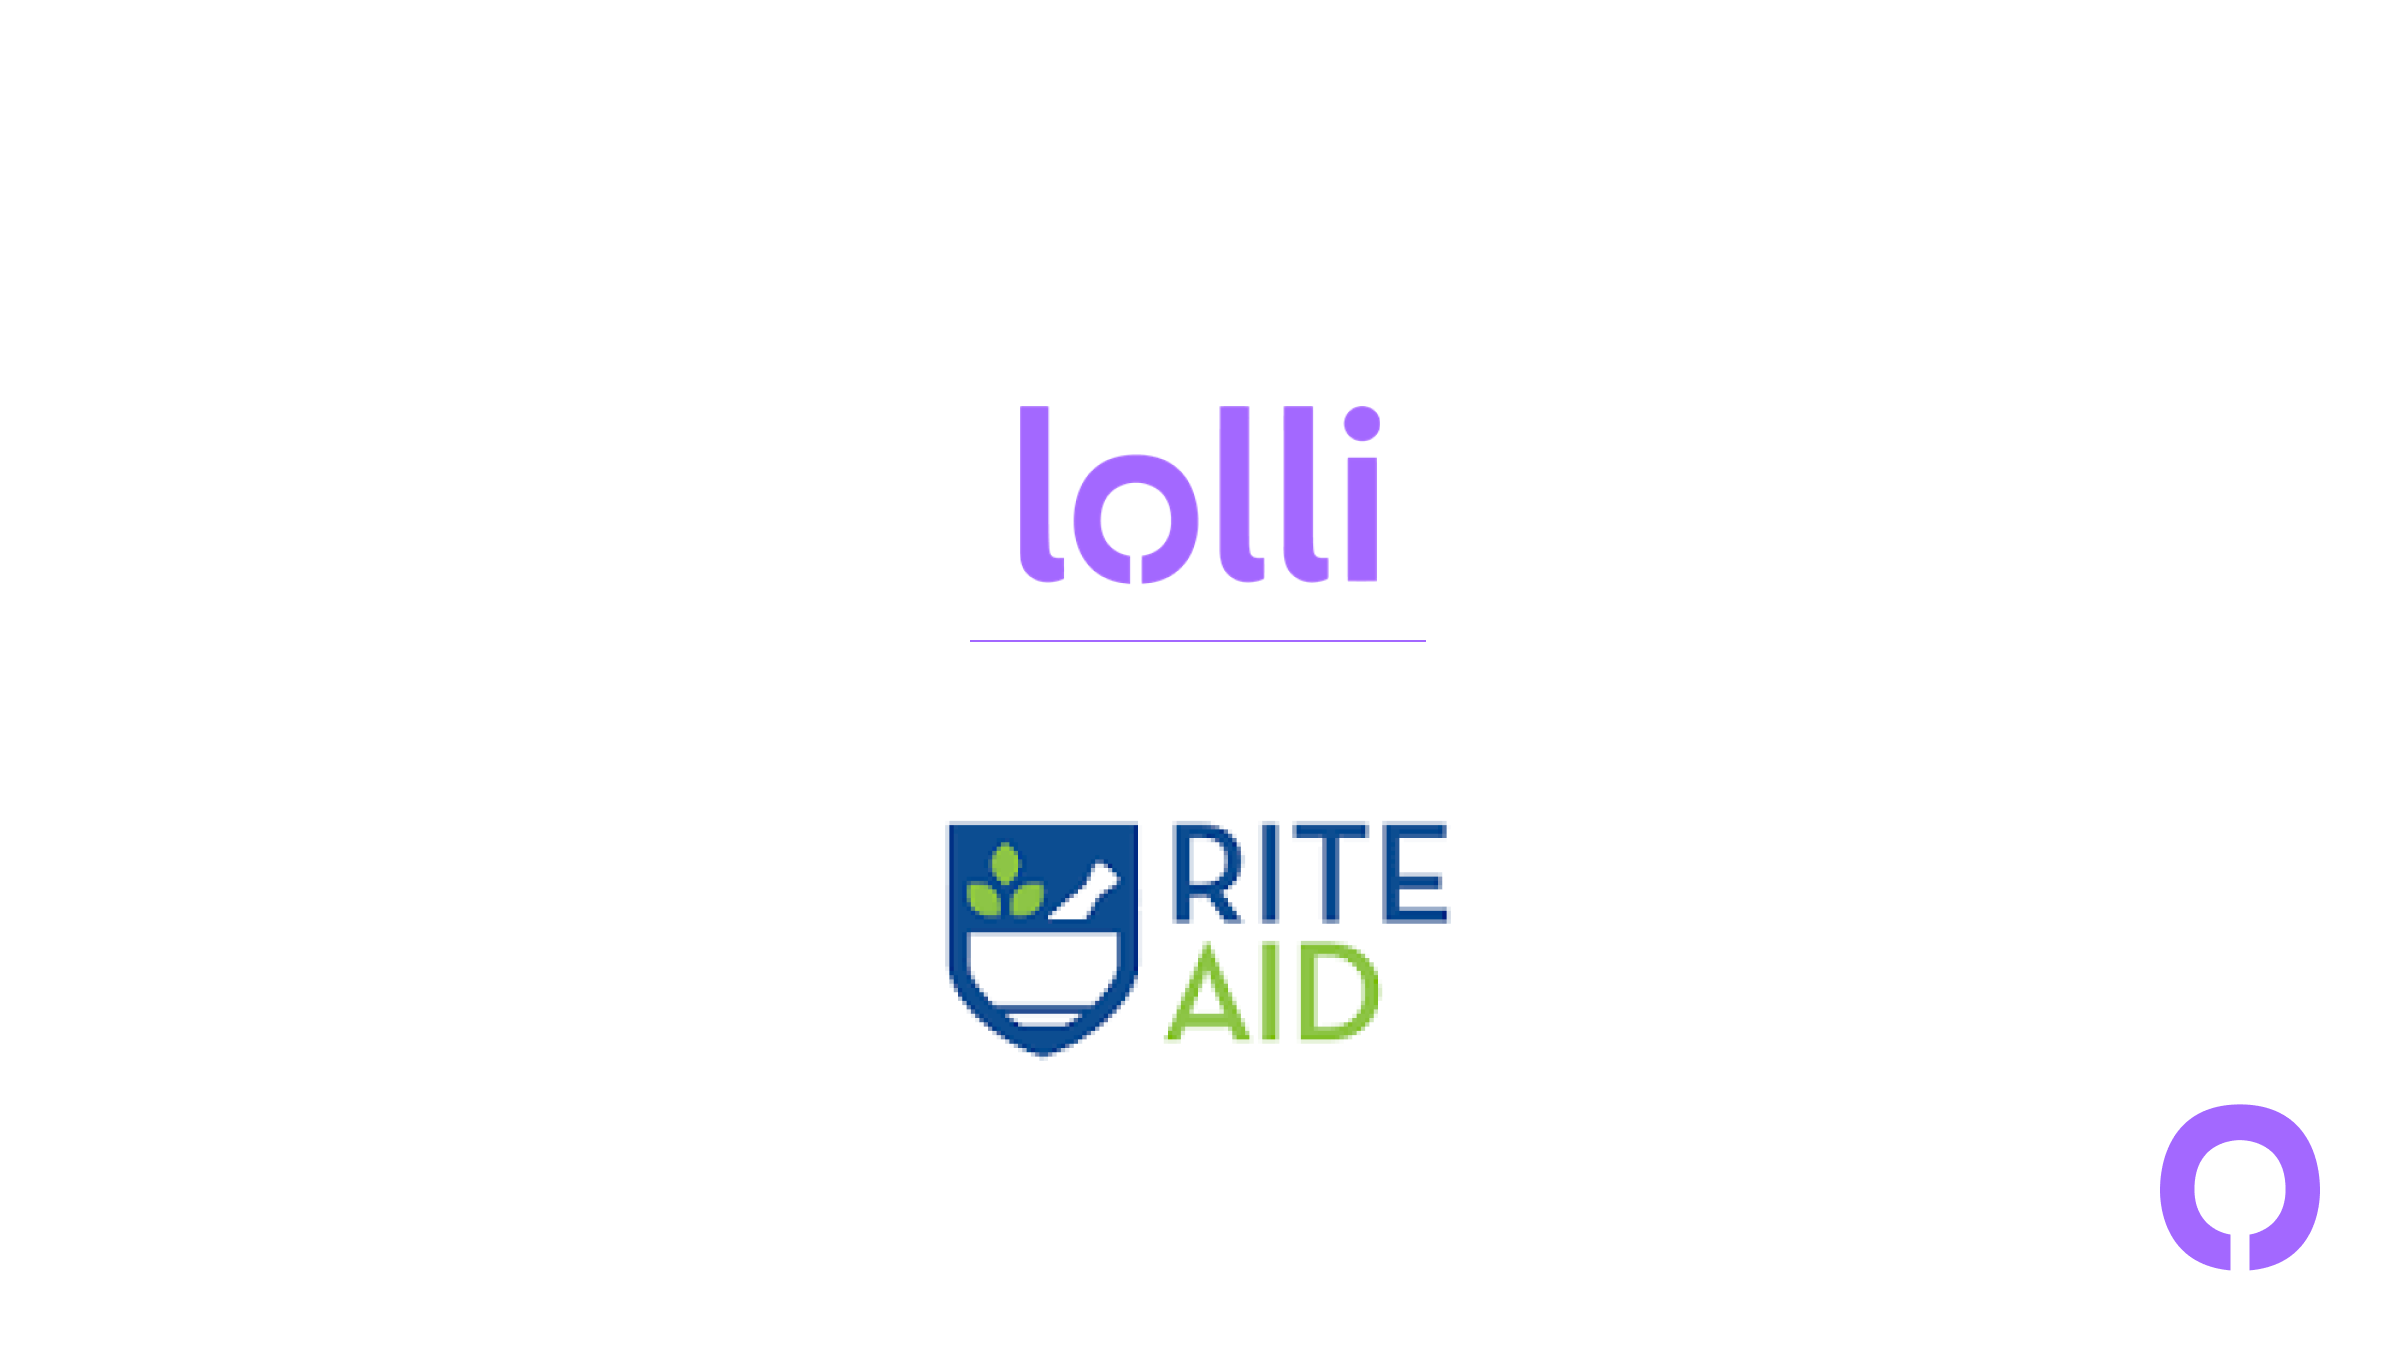 BREAKING: RITE AID IS NOW ON LOLLI!